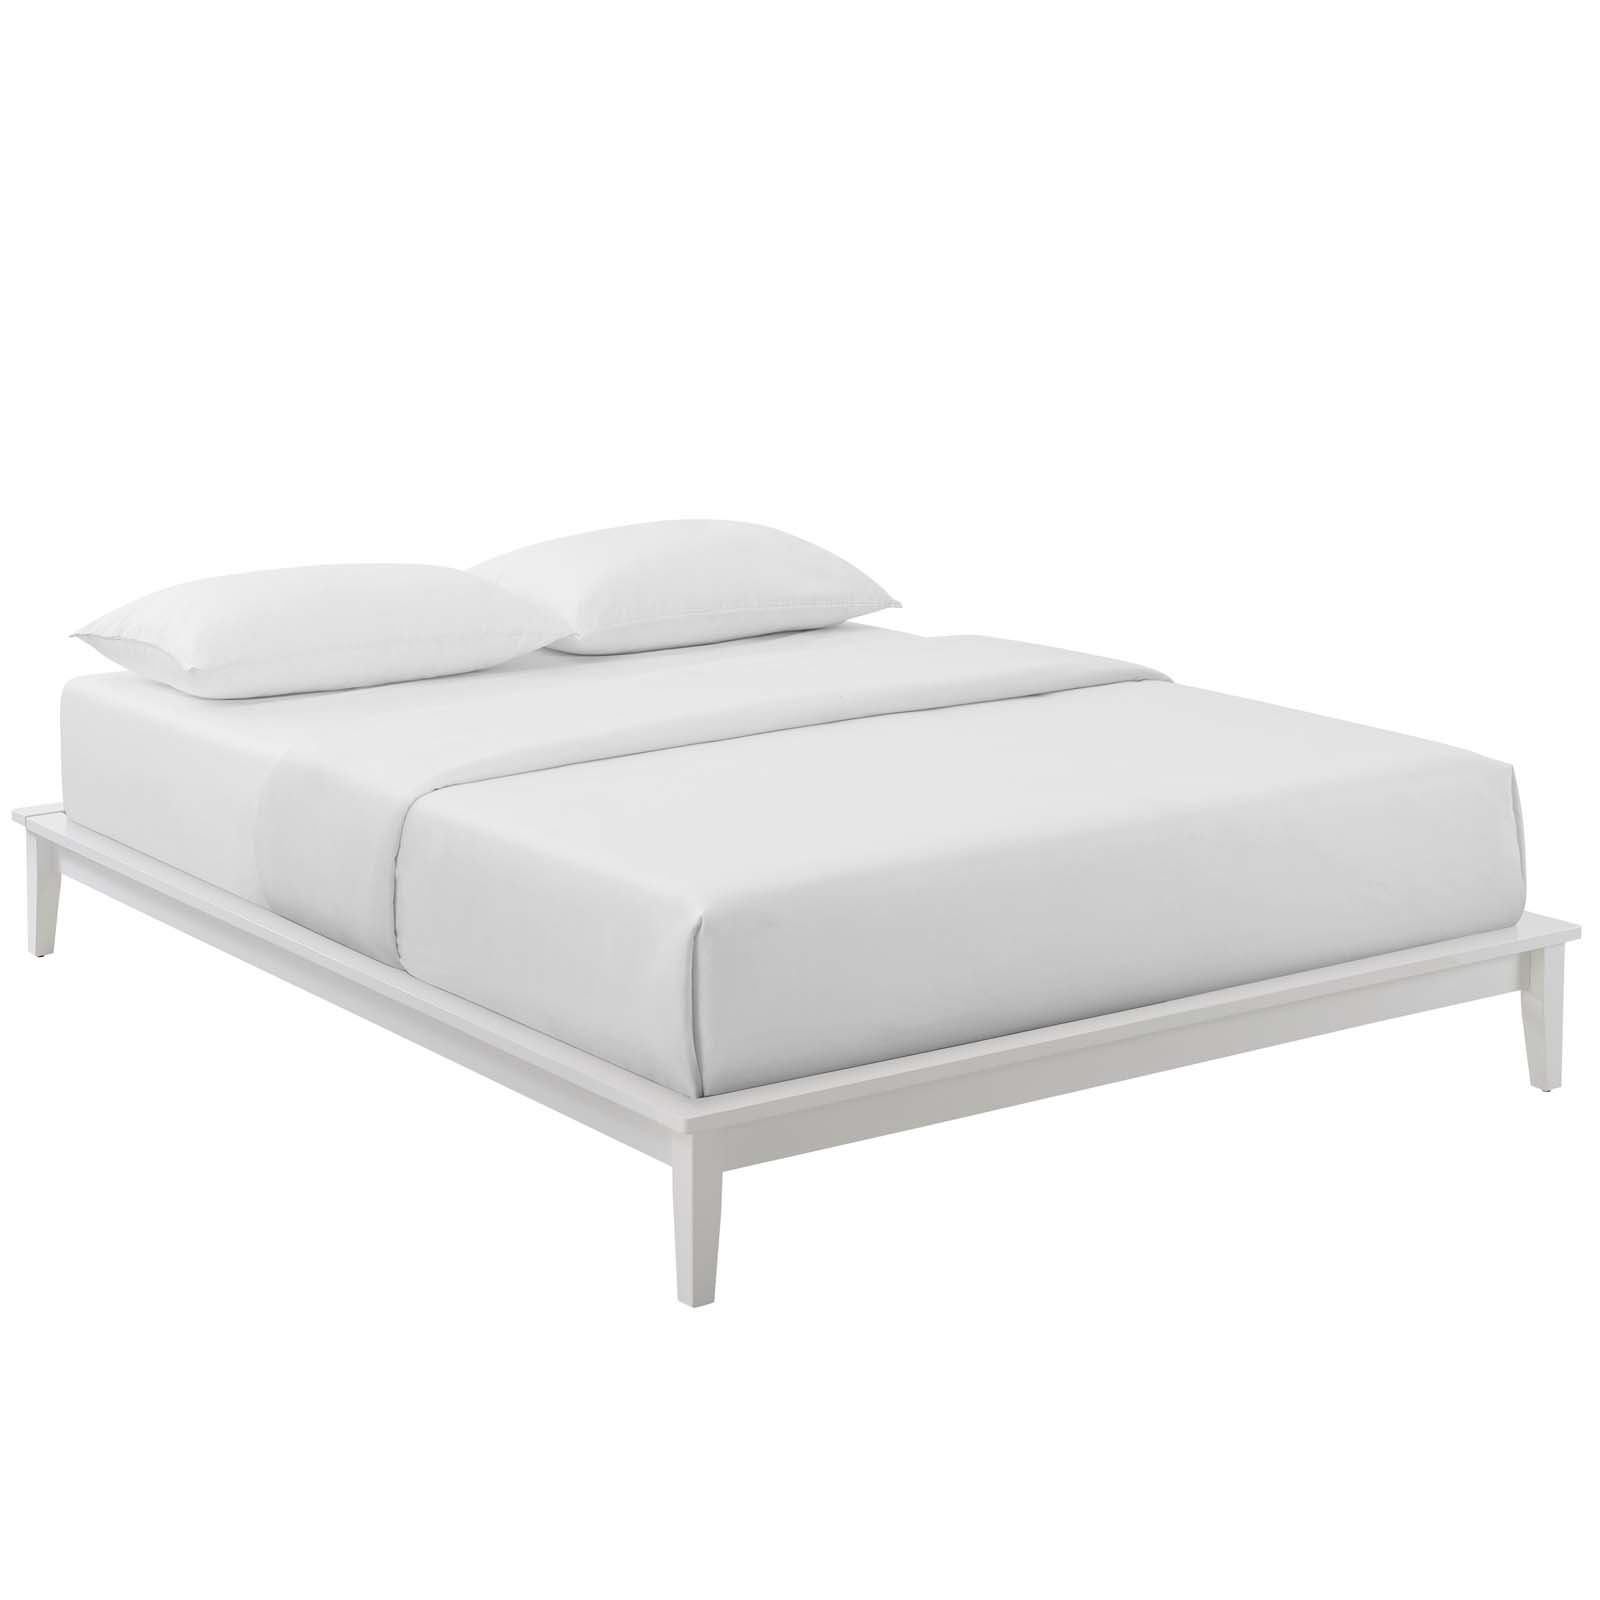 Lodge Queen Wood Platform Bed Frame White by Modway